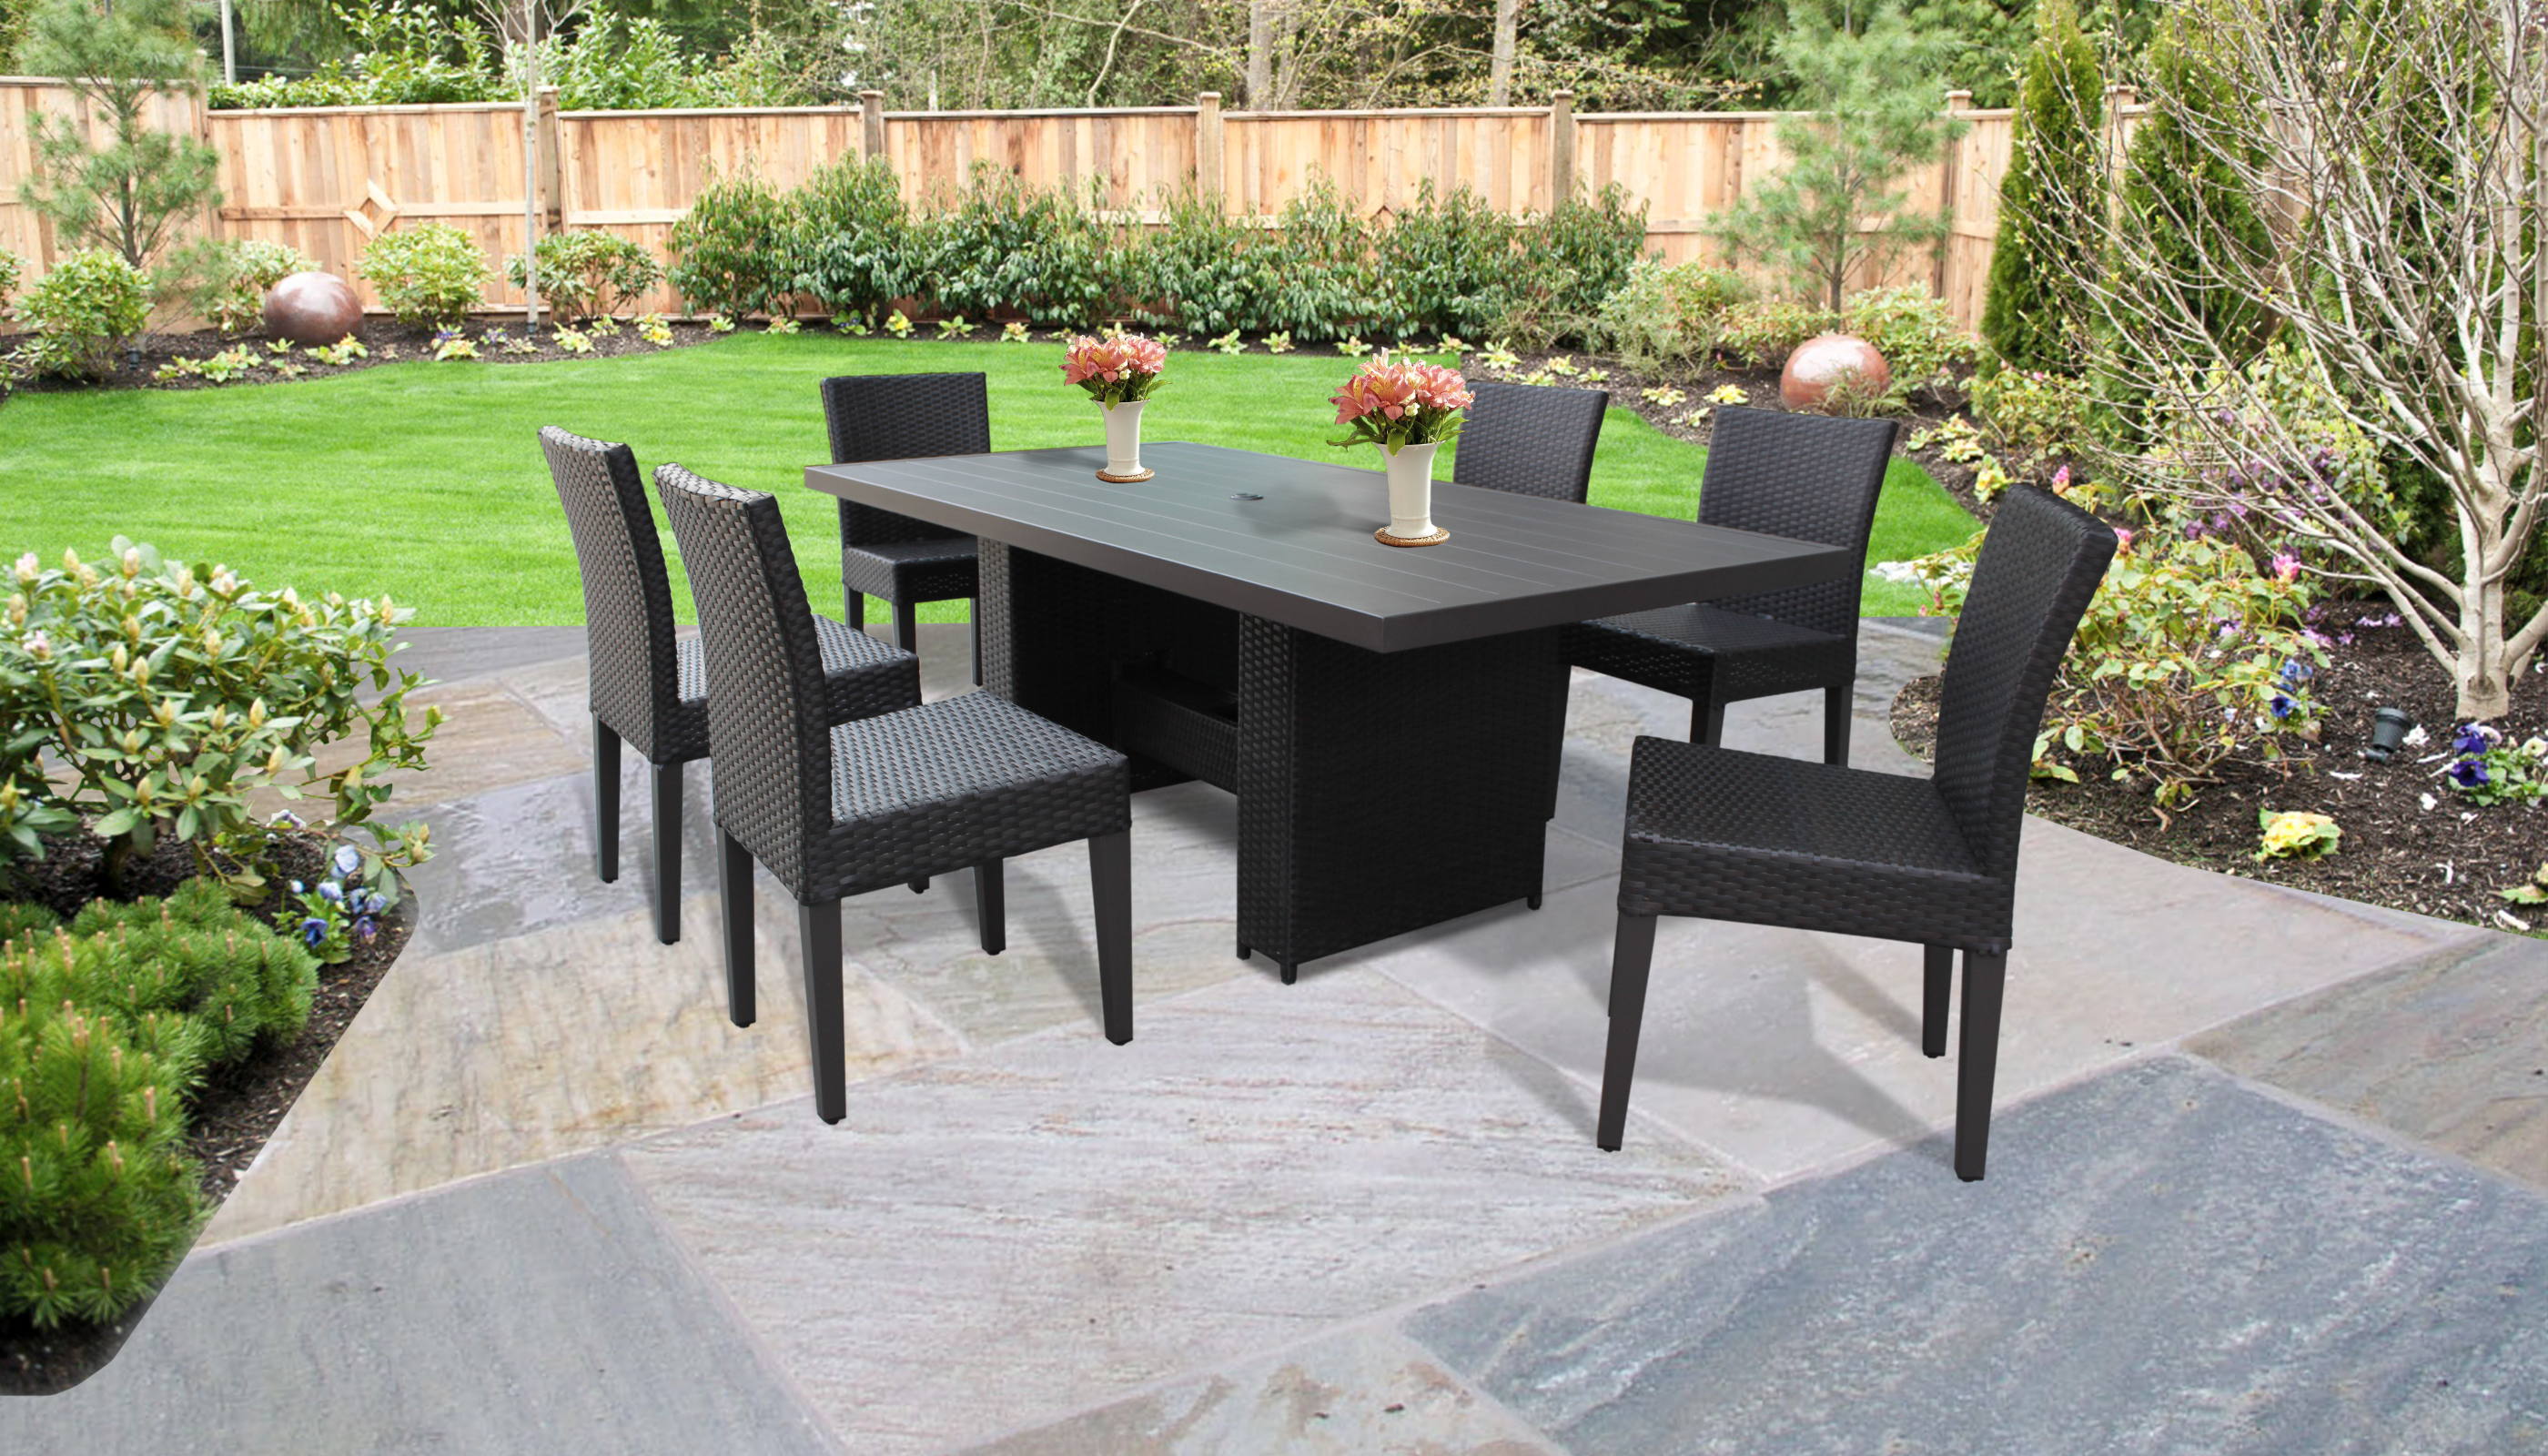 Belle Rectangular Outdoor Patio Dining Table with 6 Armless Chairs